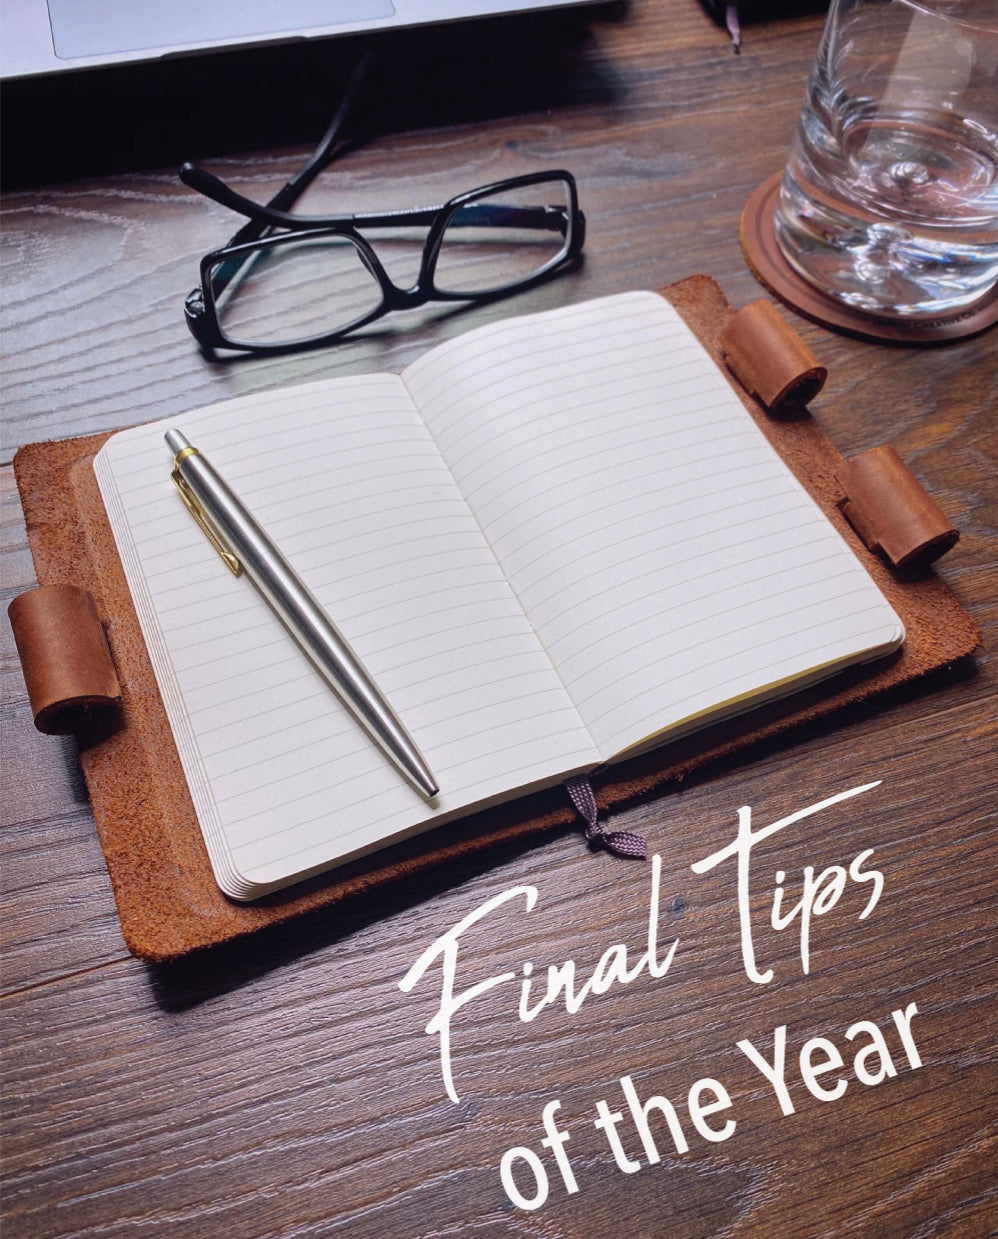 Final Tips of the Year 2020 - Pictured: Mini Cut Refillable Leather Journal on desk with glasses and a leather coaster and stainless steel parker jotter pen.